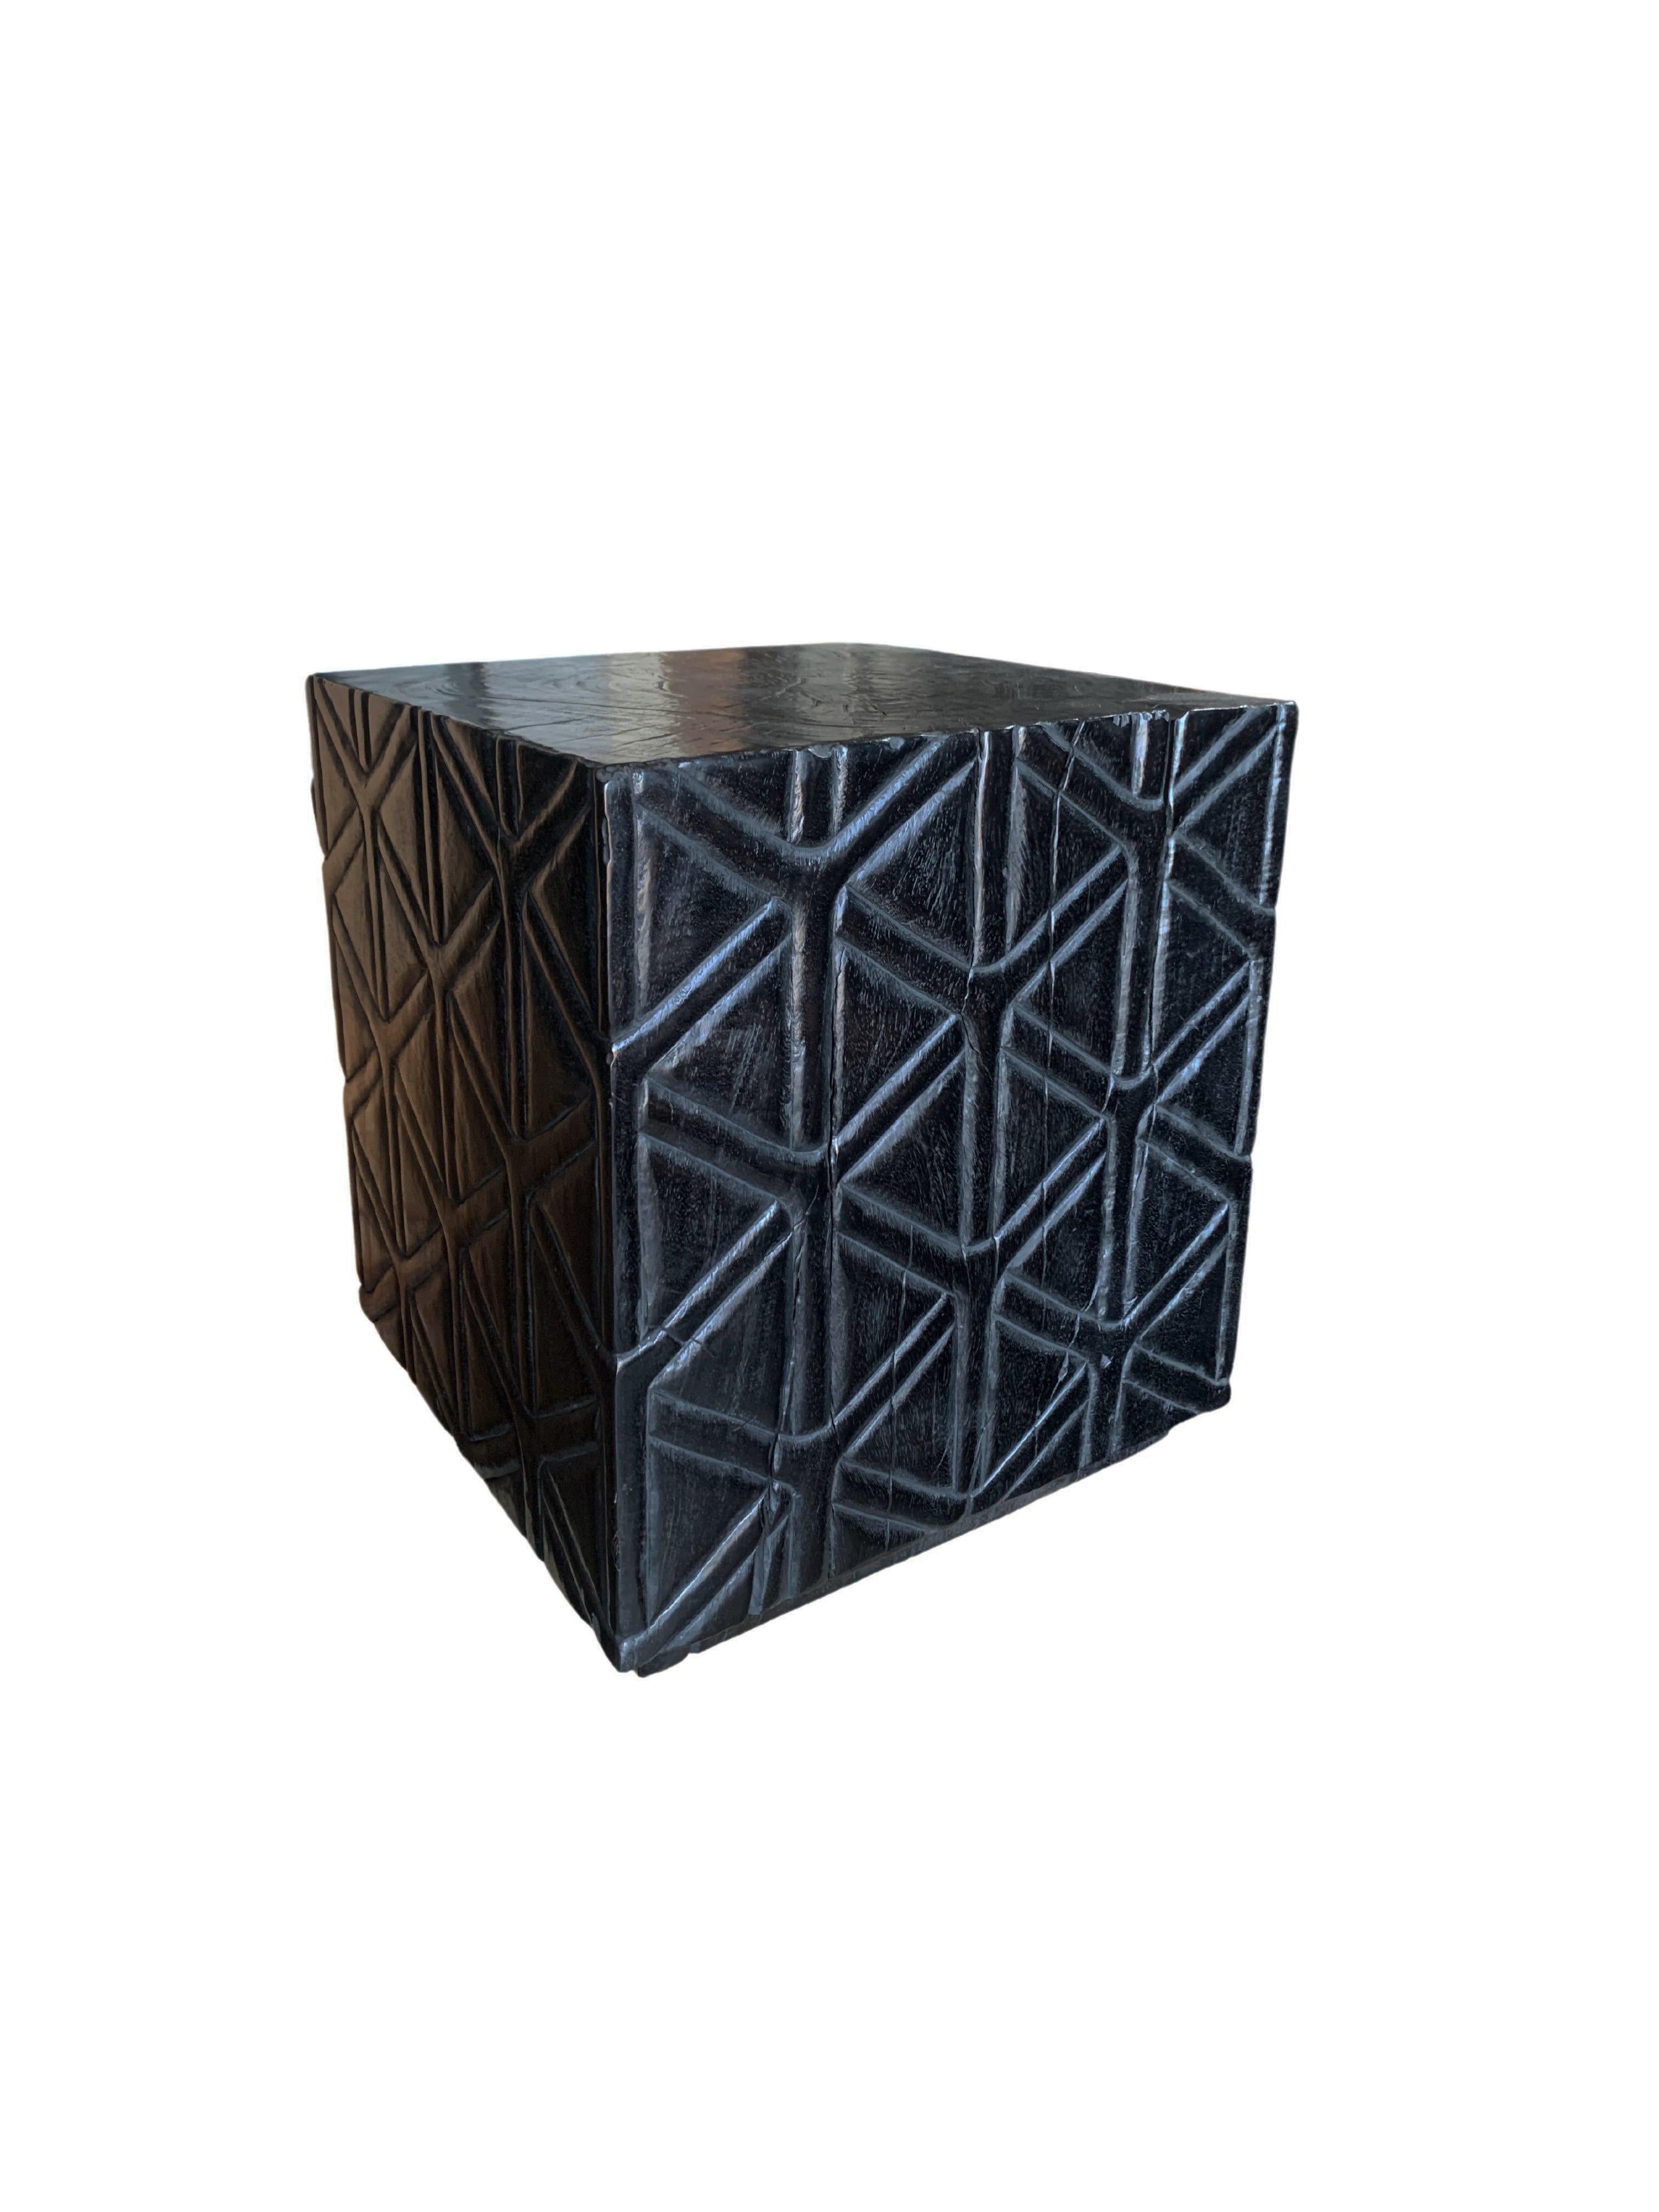 A wonderfully sculptural side table with a checkered pattern hand-carved on four sides. Its rich black pigment was achieved through burning the wood three times. Its neutral pigment and subtle wood texture makes it perfect for any space. A uniquely